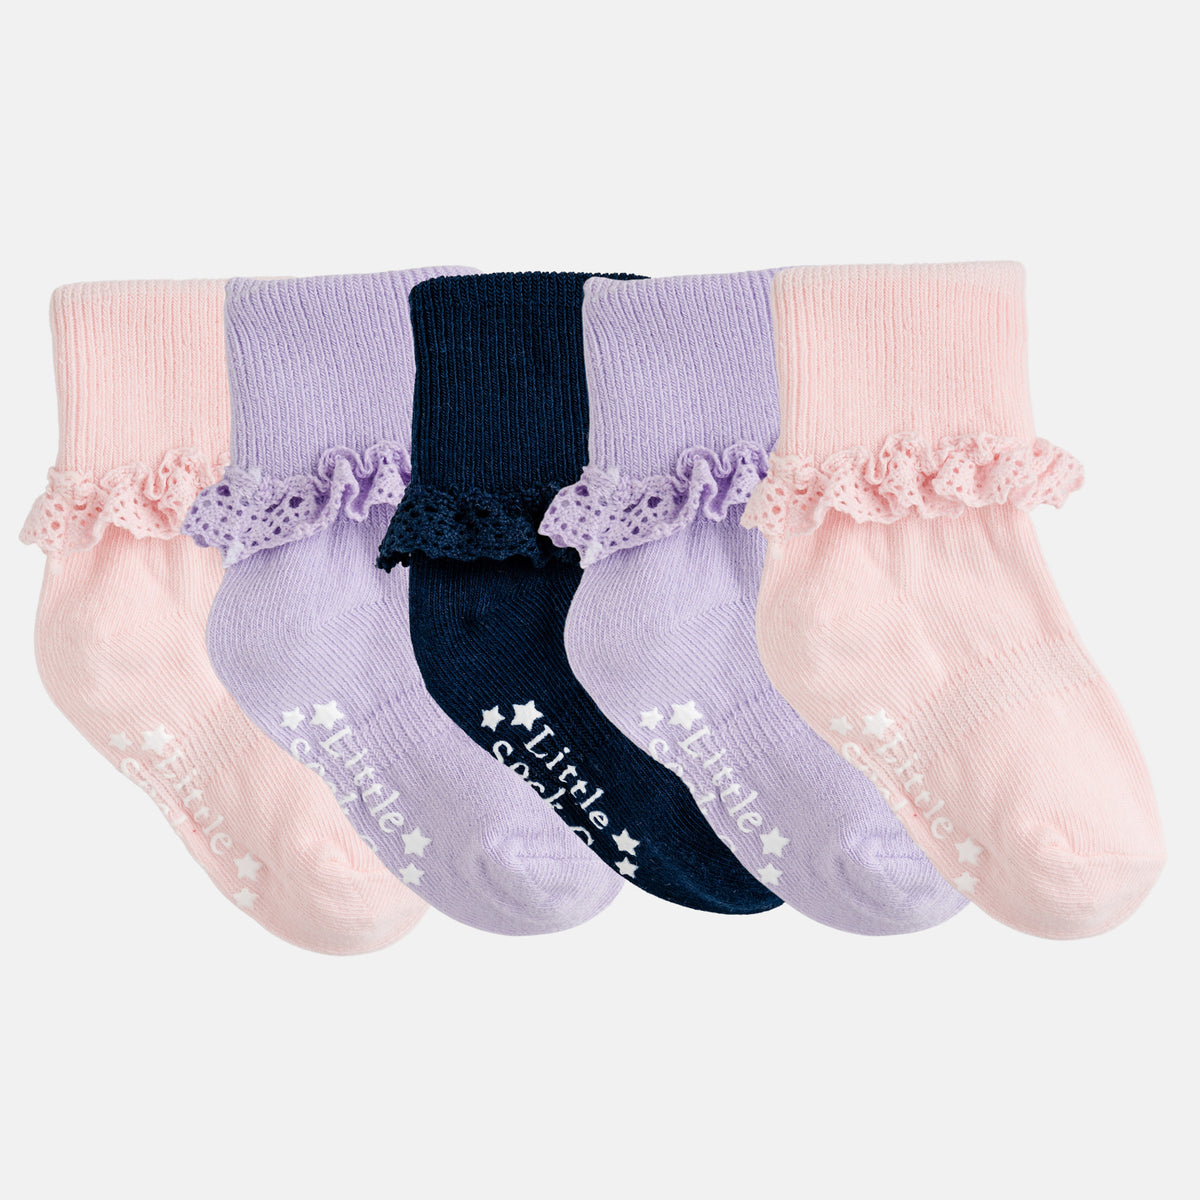 Frilly Non-Slip Stay-on Baby and Toddler Socks - 5 Pack in Amethyst, Navy and Pink Lemonade